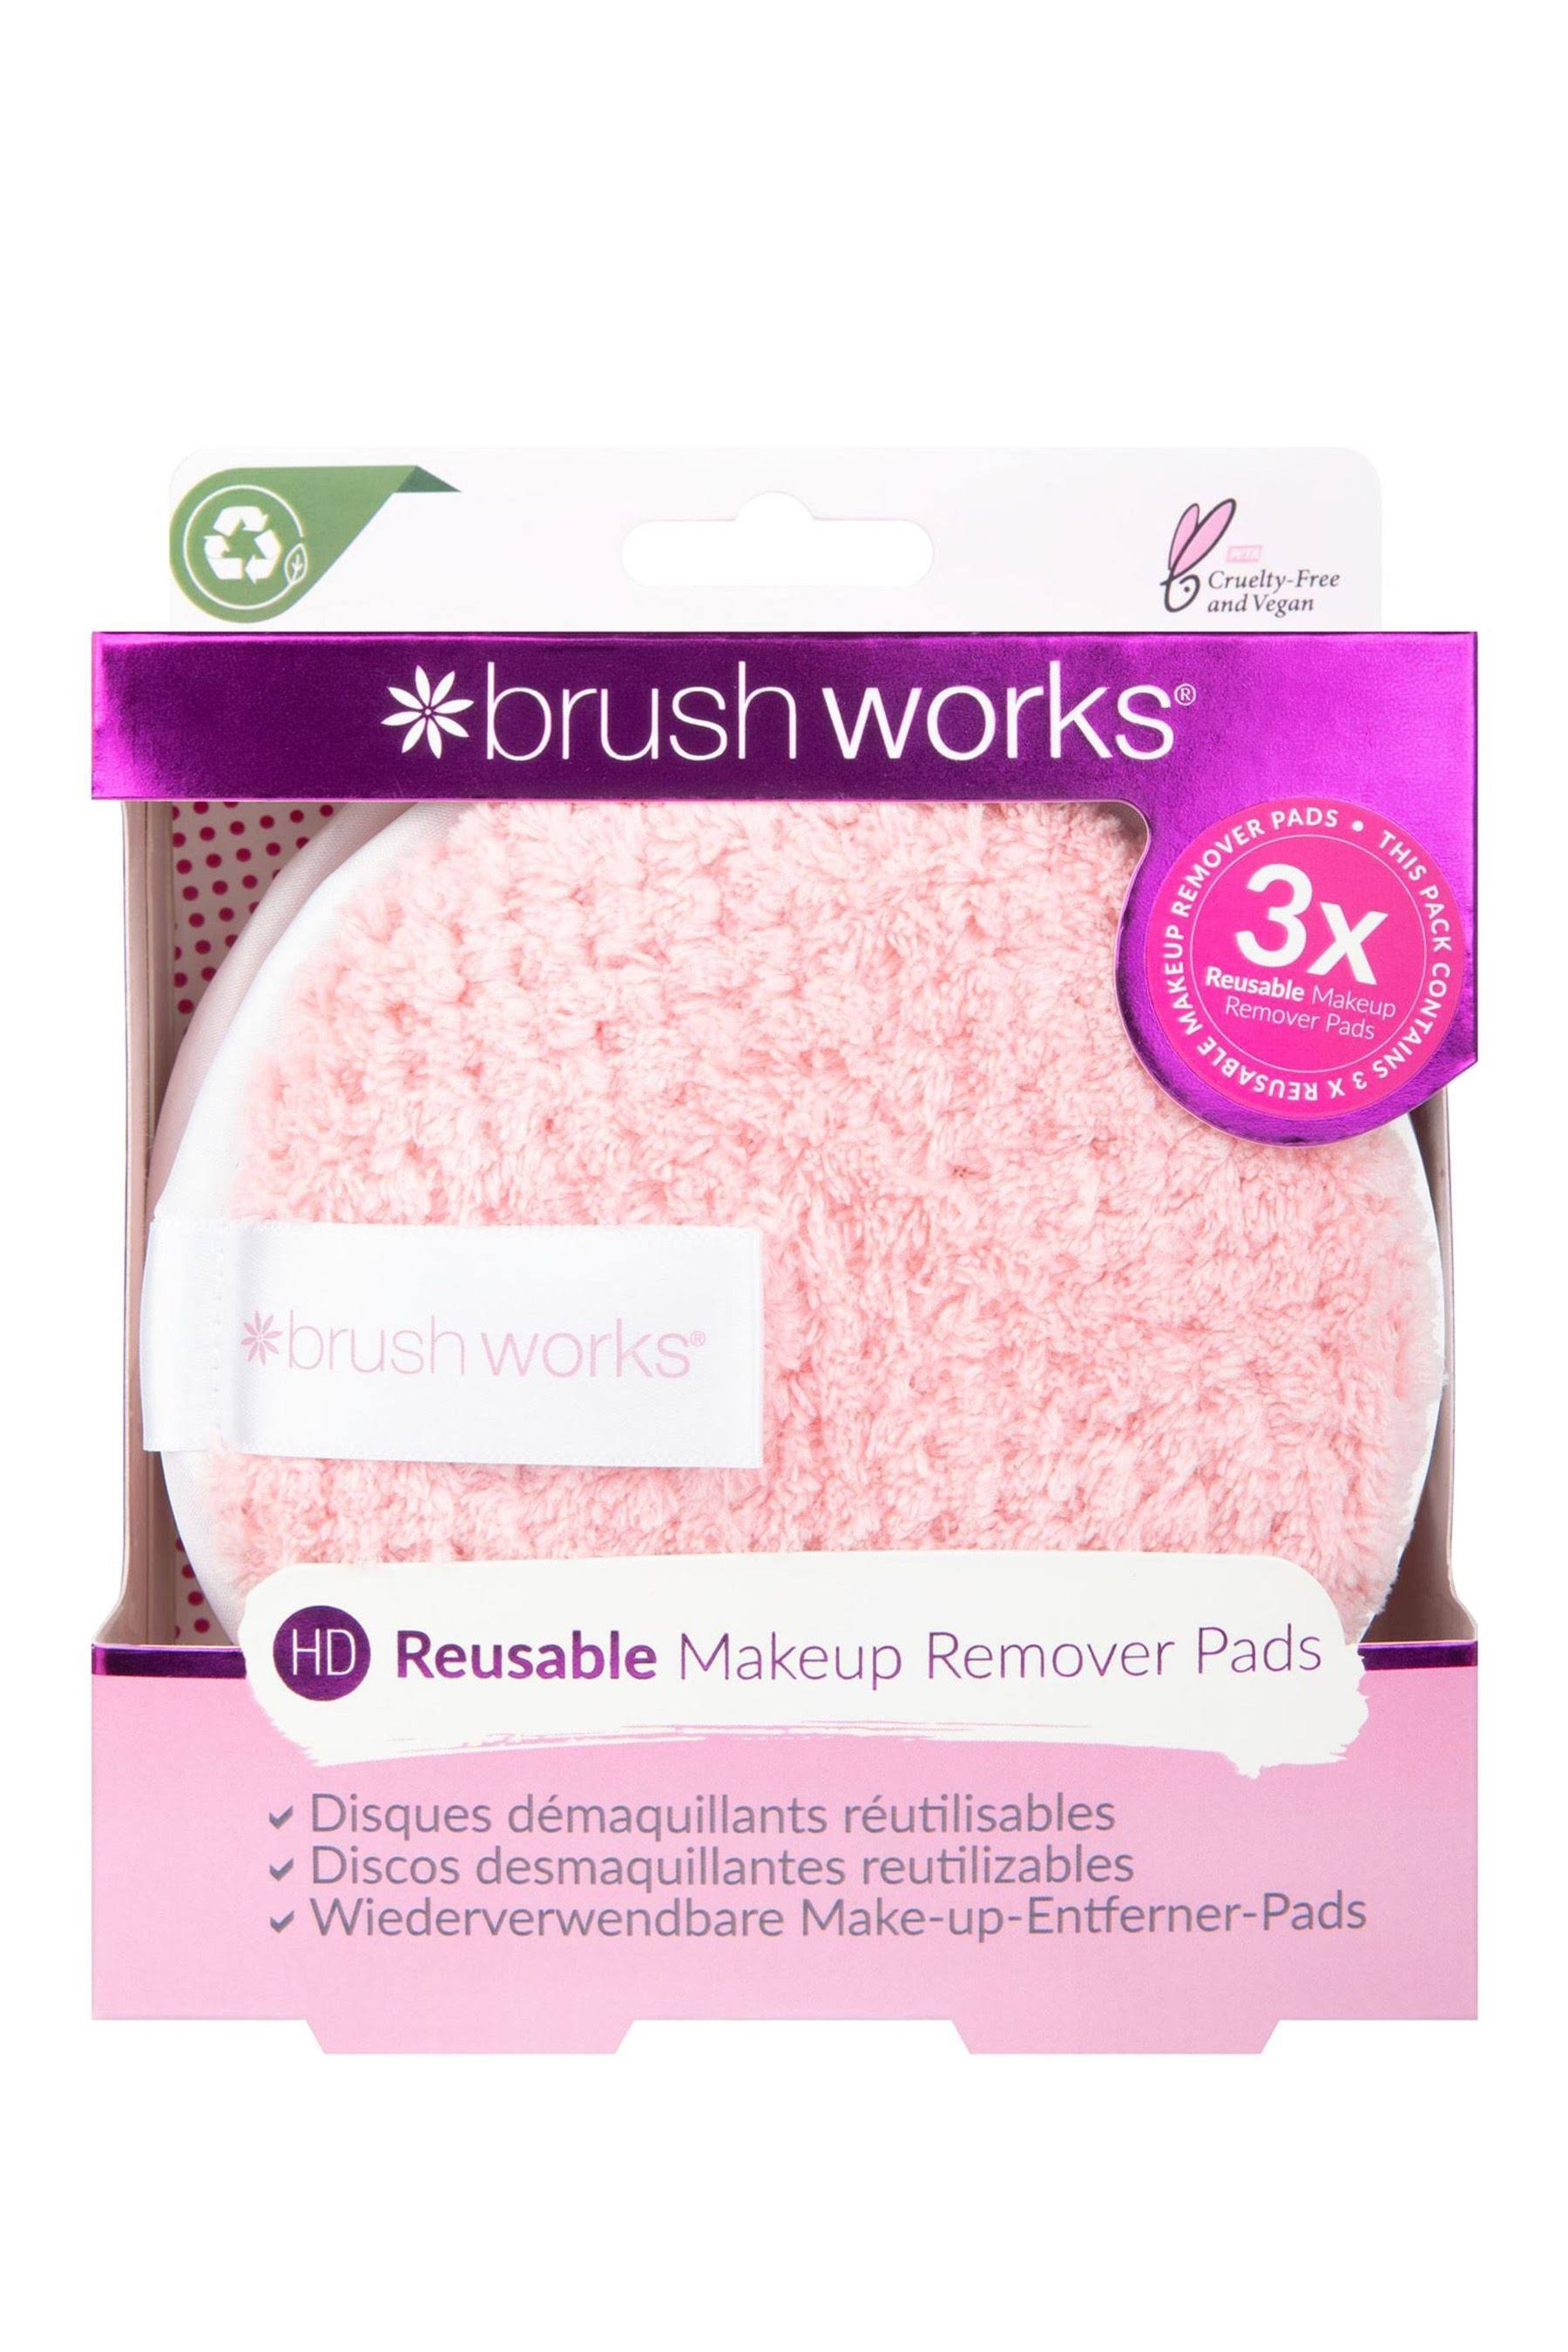 Brushworks HD Reusable Makeup Remover Pads Pack of 3